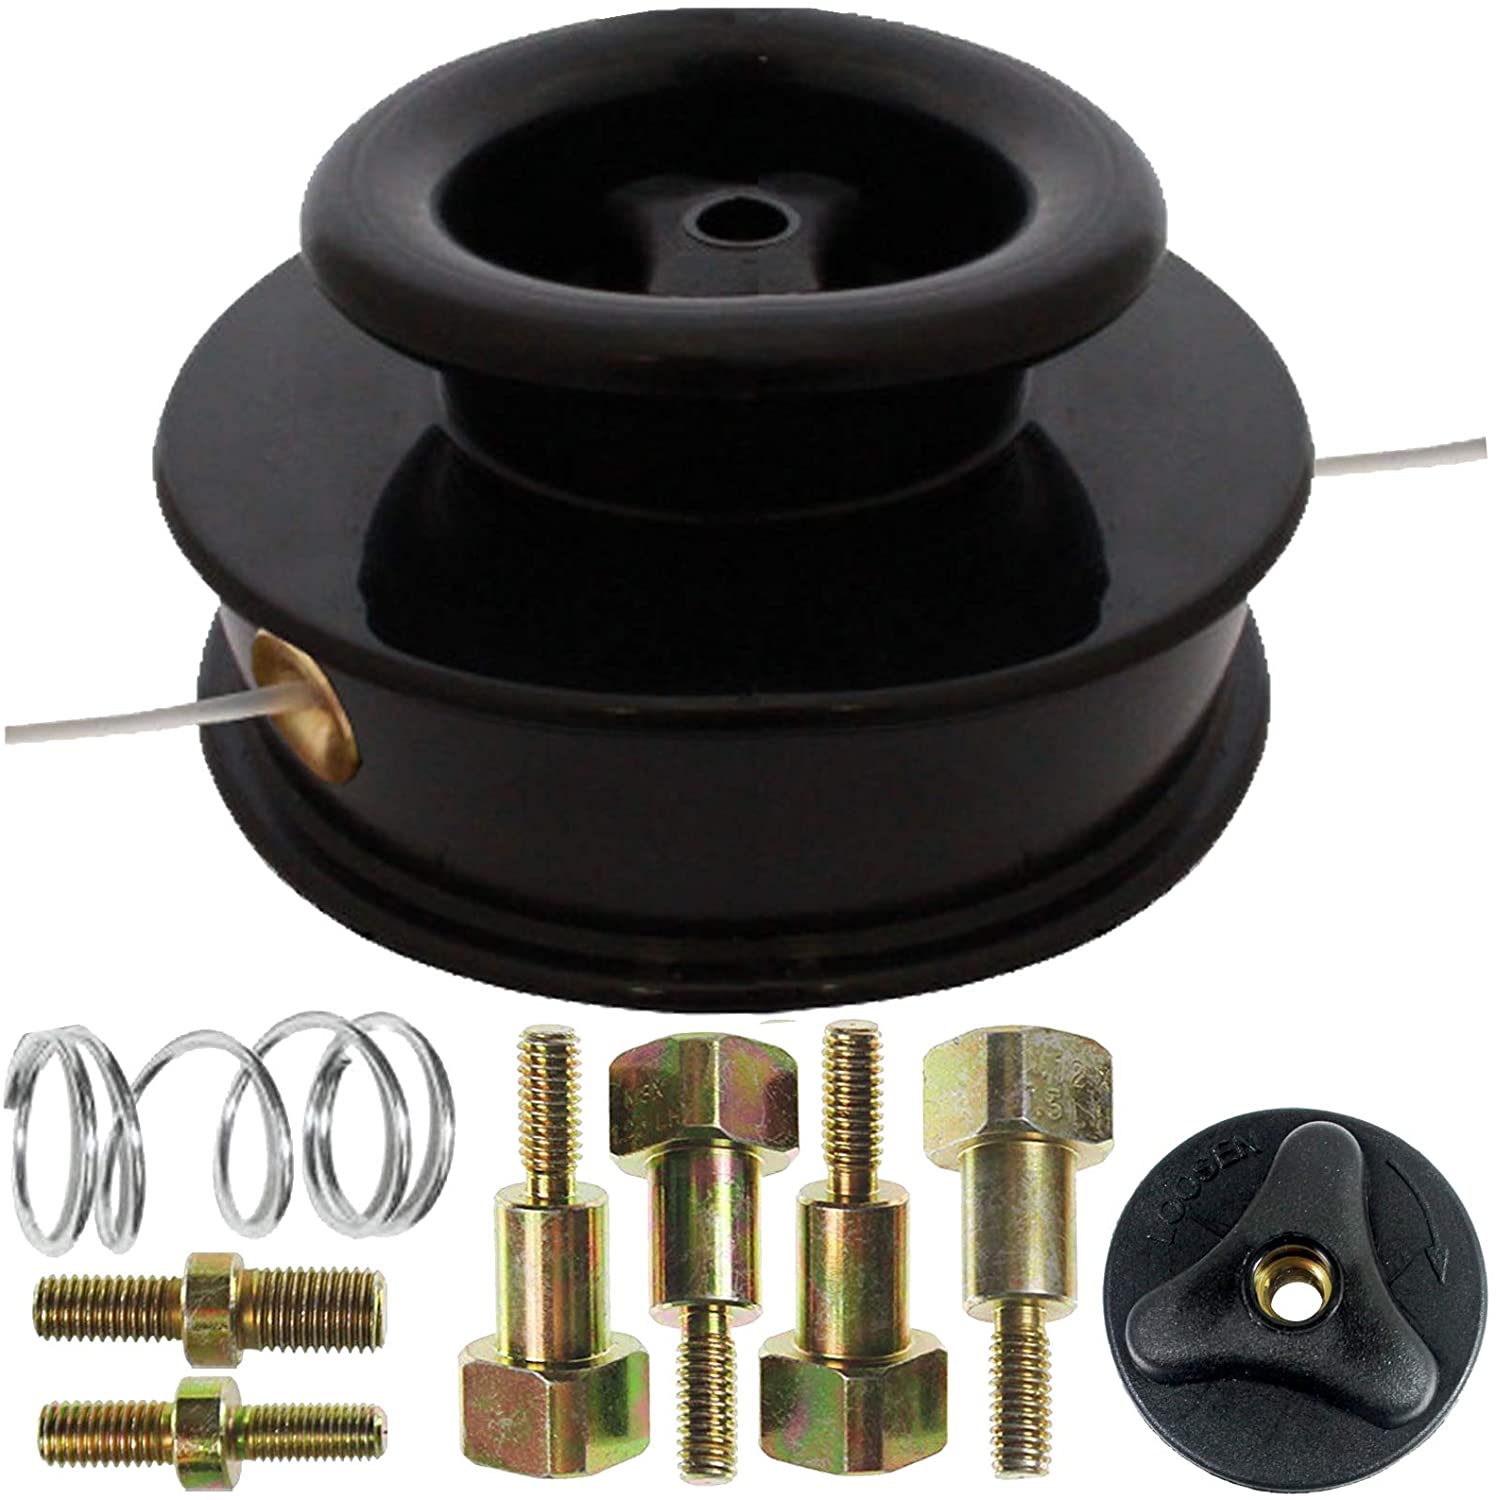 Dual Line Manual Feed Head with Bolts for KAWASAKI Strimmer/Trimmer/Brushcutter